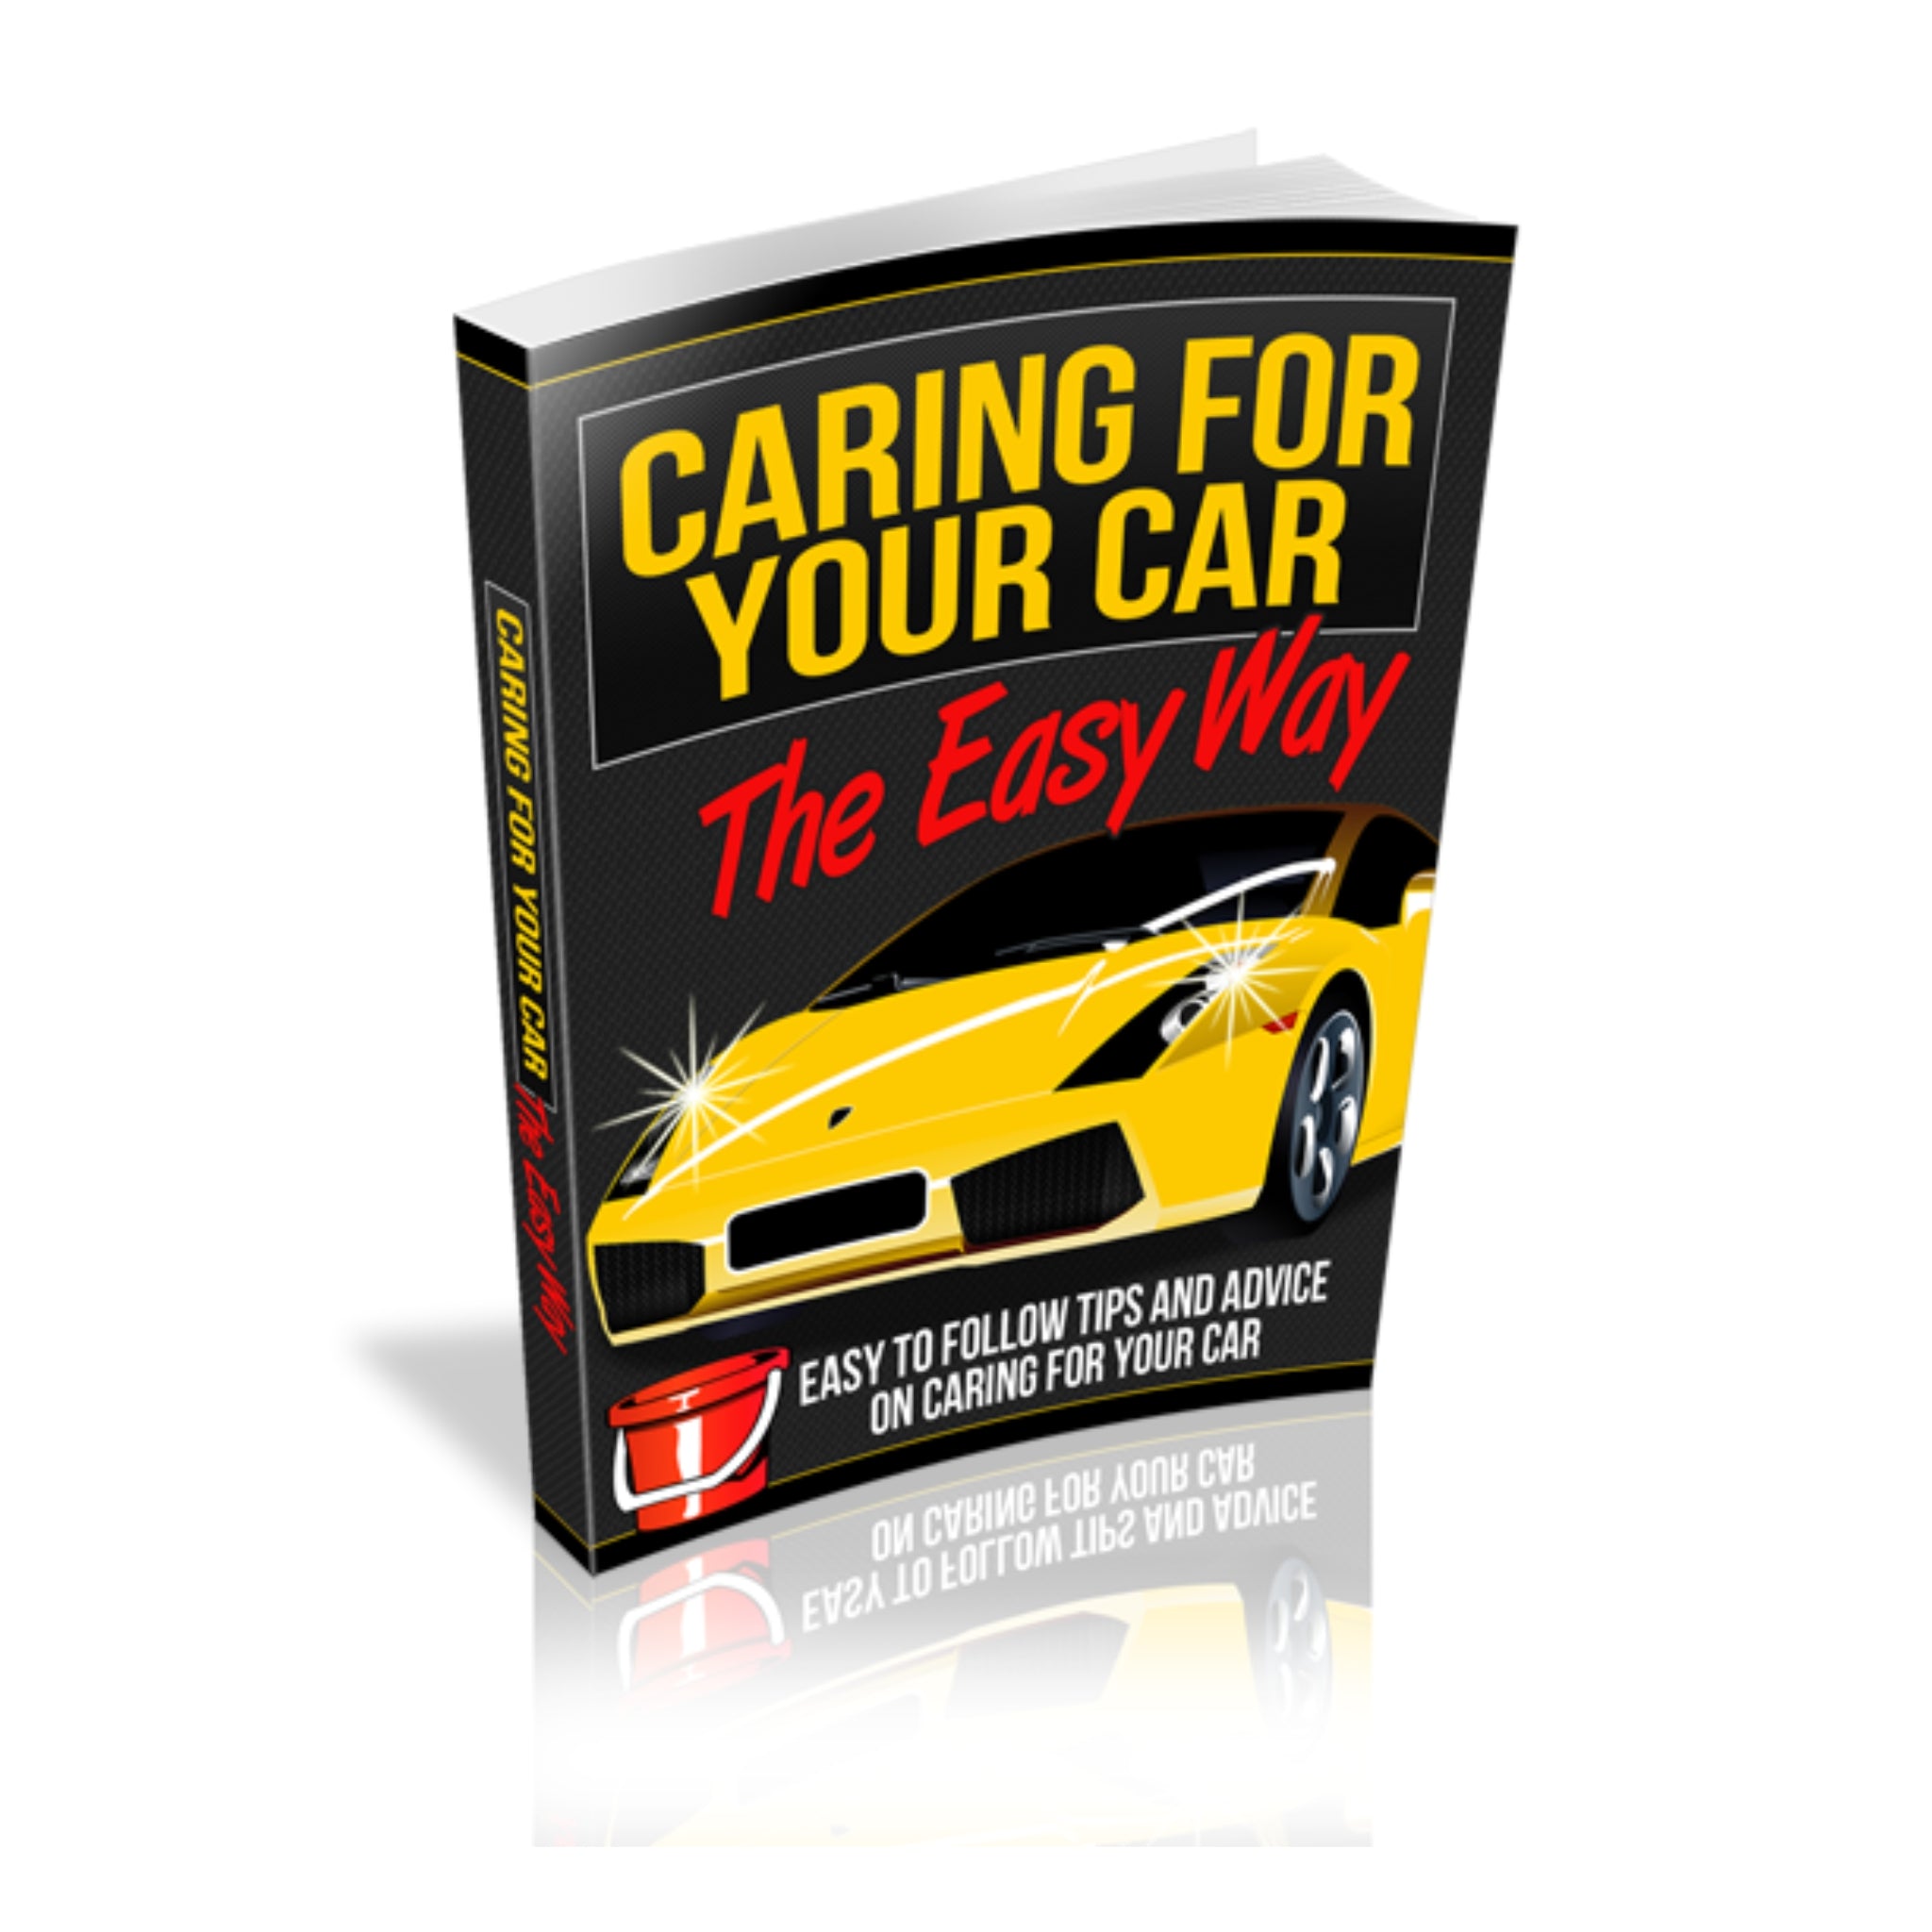 Caring For Your Car The Easy Way Ebook